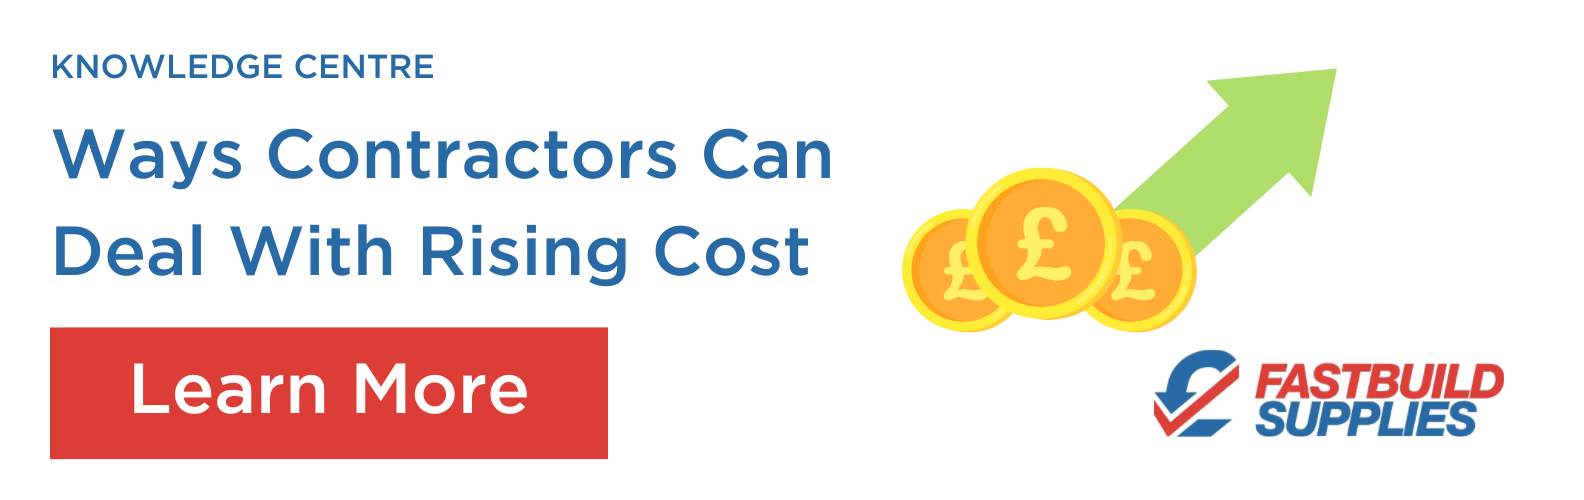 Ways contractors can deal with rising cost